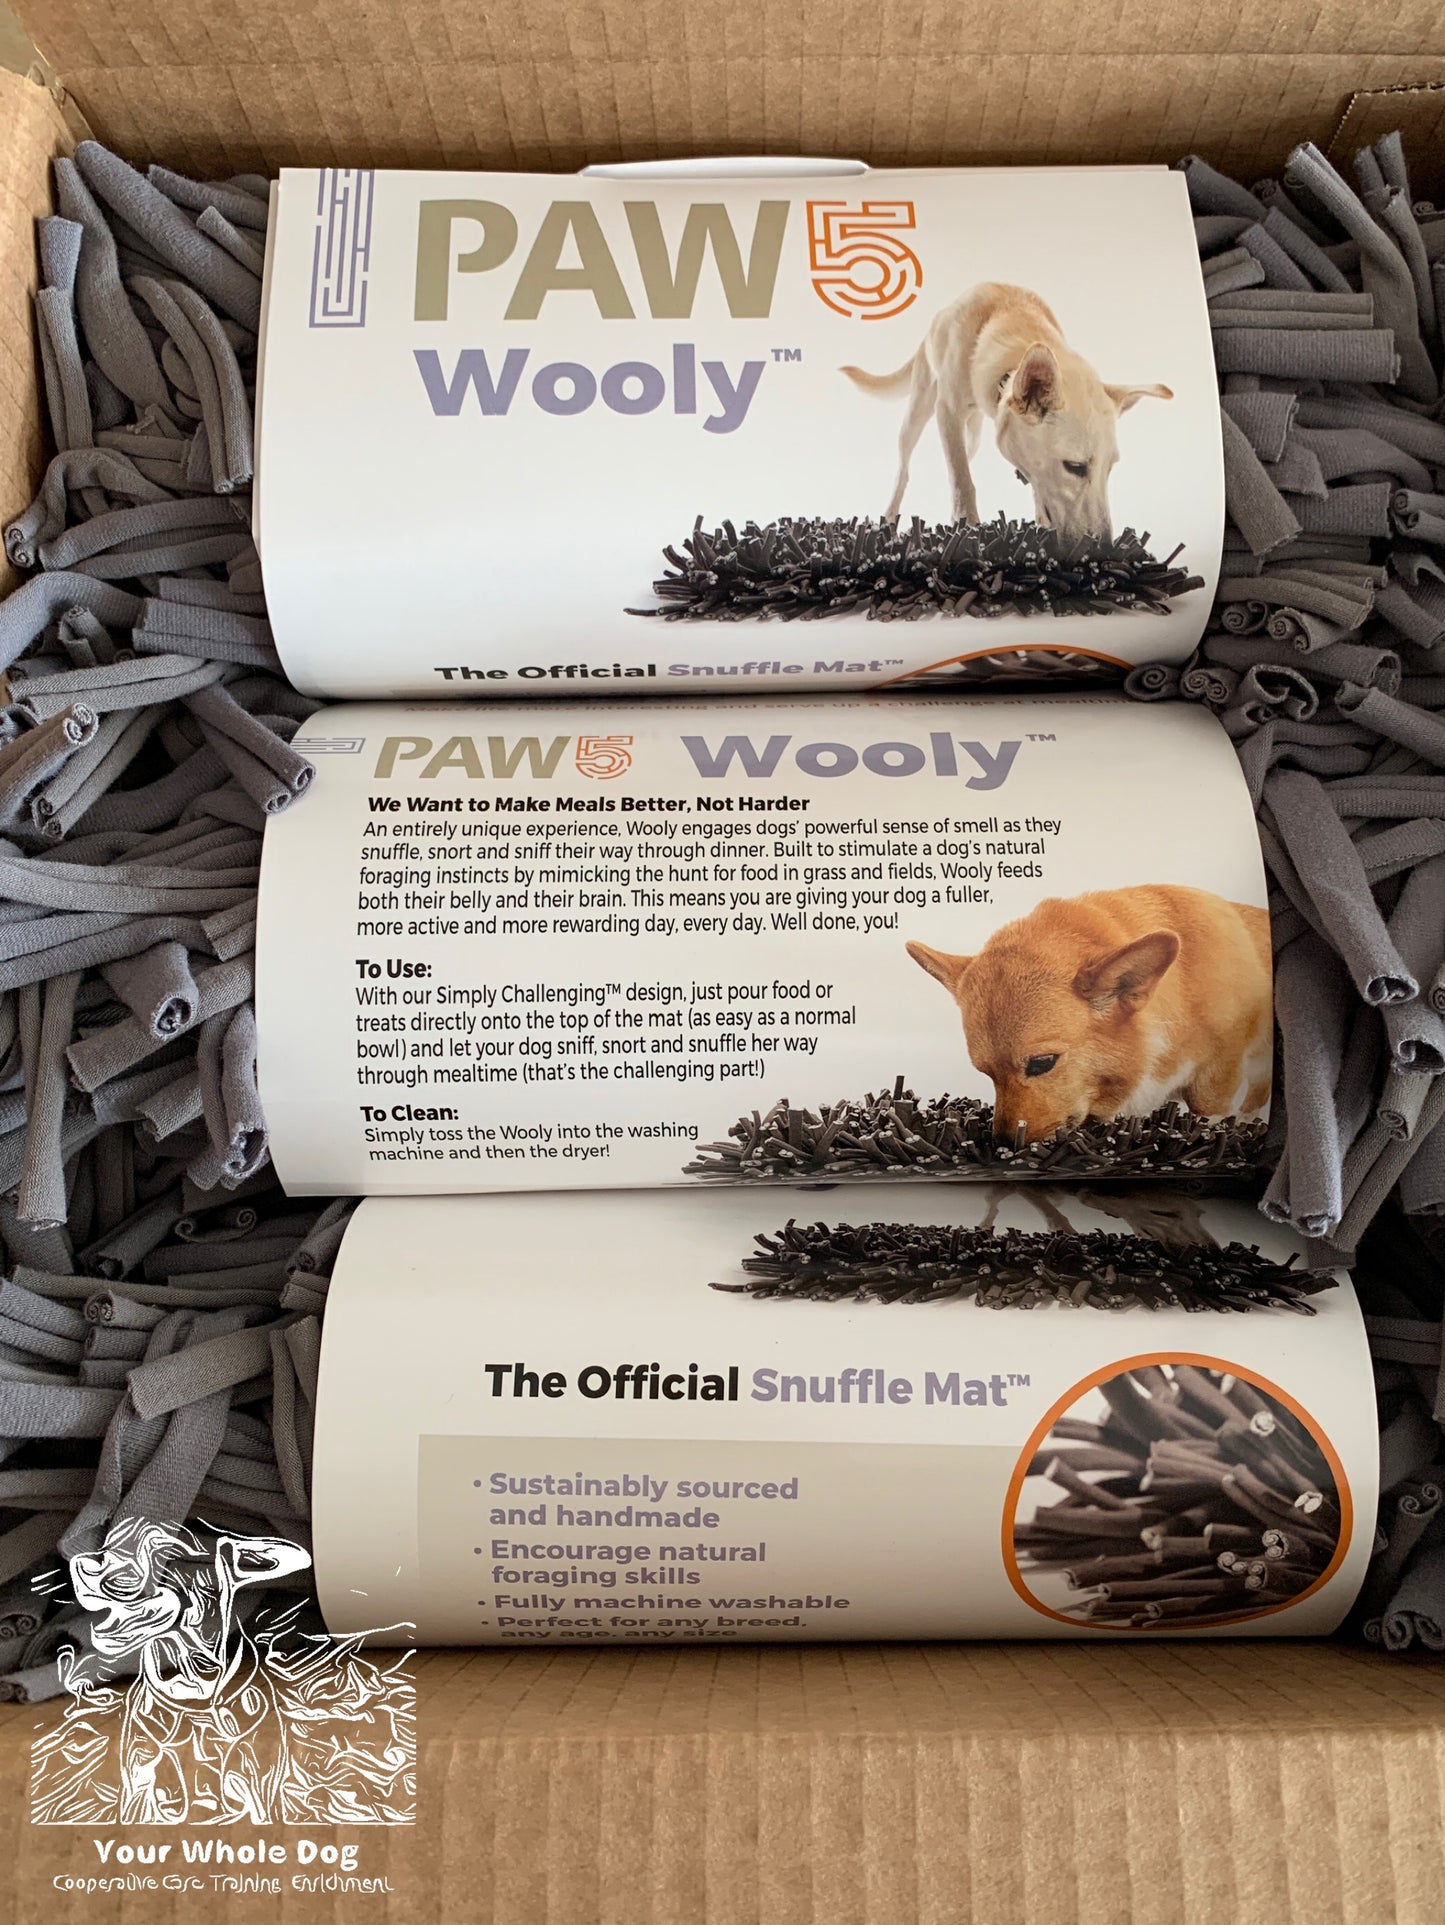 Your Whole Dog - the official Paw5 Wooly Snuffle Mat.